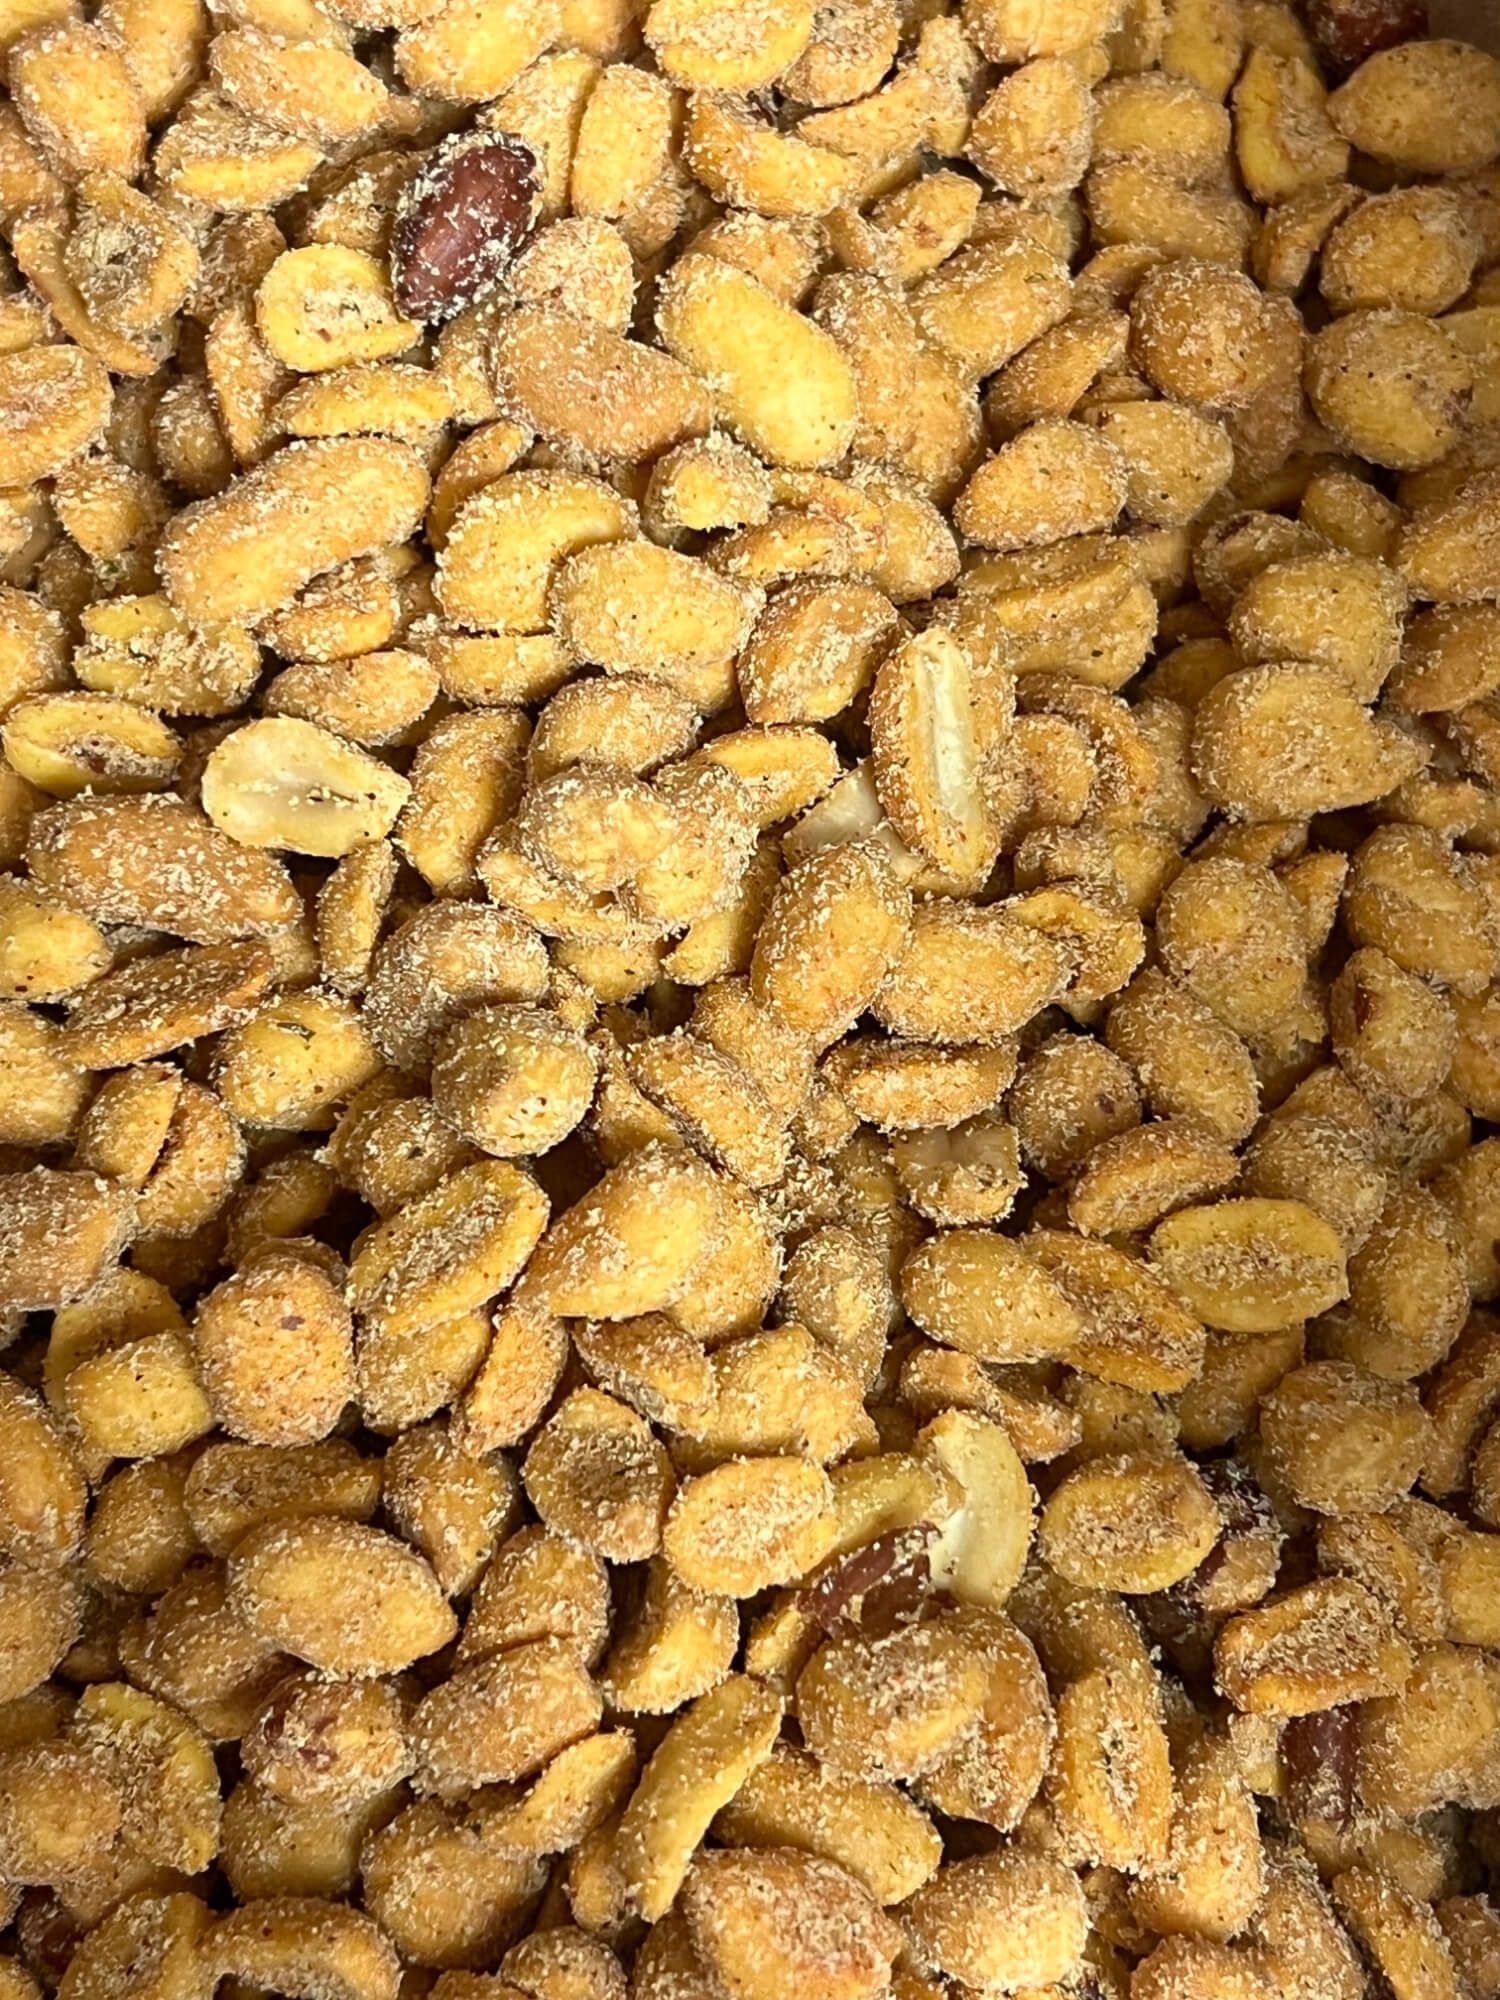 A close up of a pile of peanuts covered in sugar.